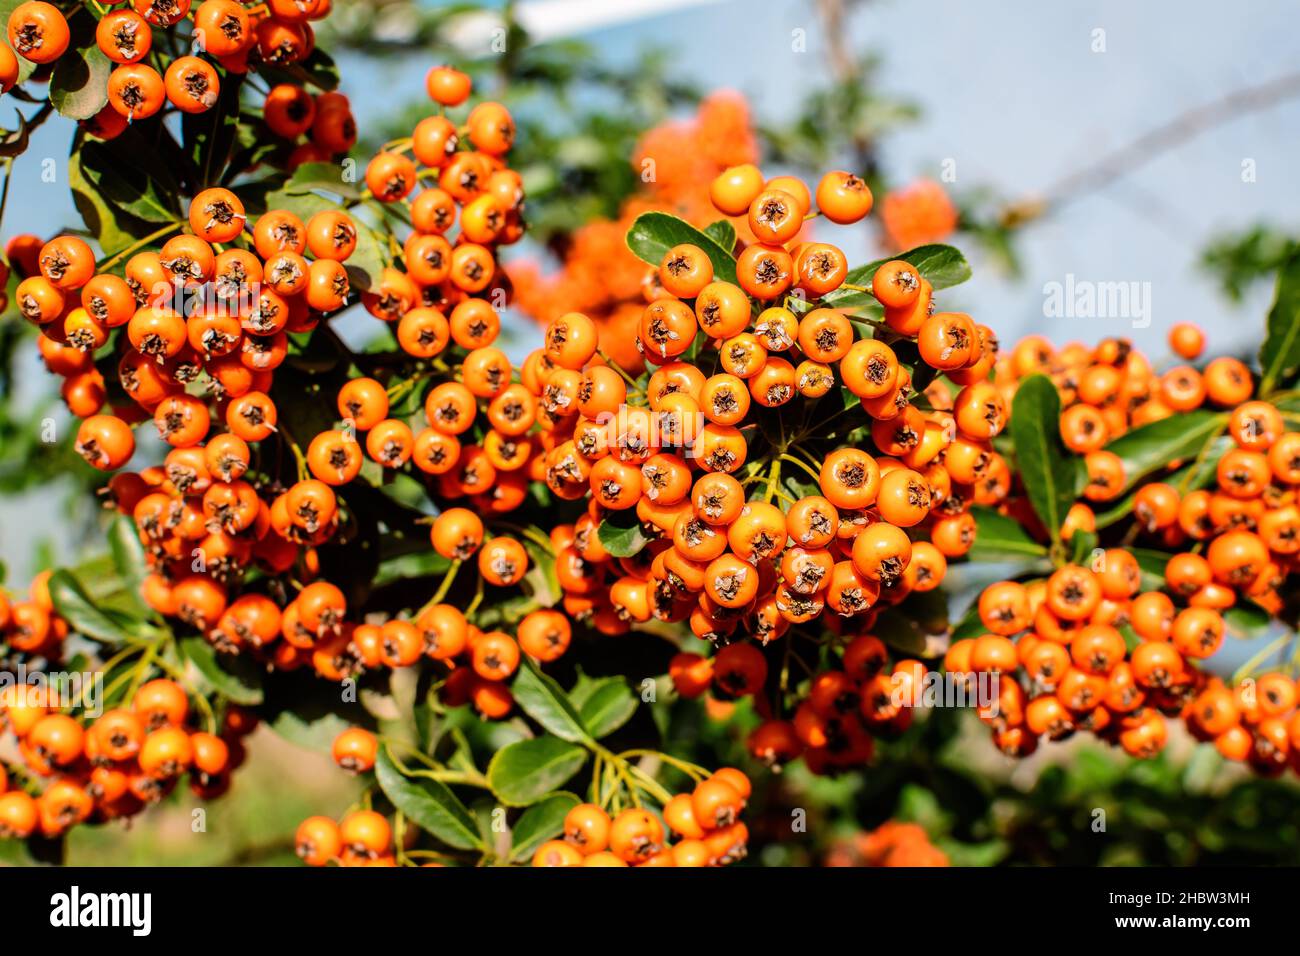 Small yellow and orange fruits or berries of Pyracantha plant, also known as firethorn in a garden in a sunny autumn day, beautiful outdoor floral bac Stock Photo